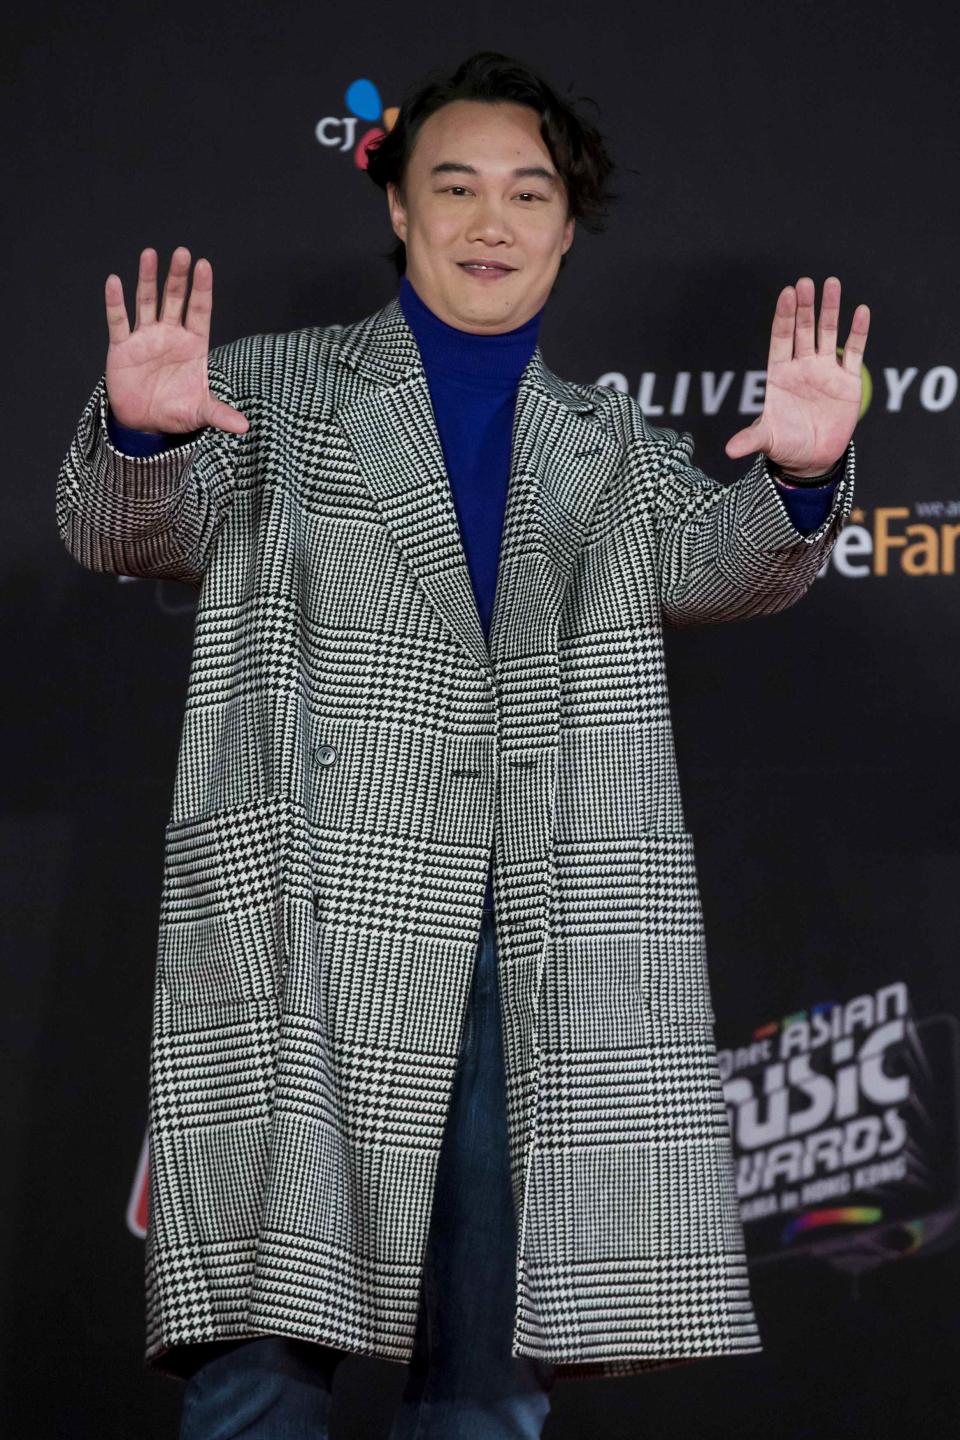 Hong Kong singer Eason Chan poses on the red carpet as he attends the 2014 Mnet Asian Music Awards (MAMA) in Hong Kong